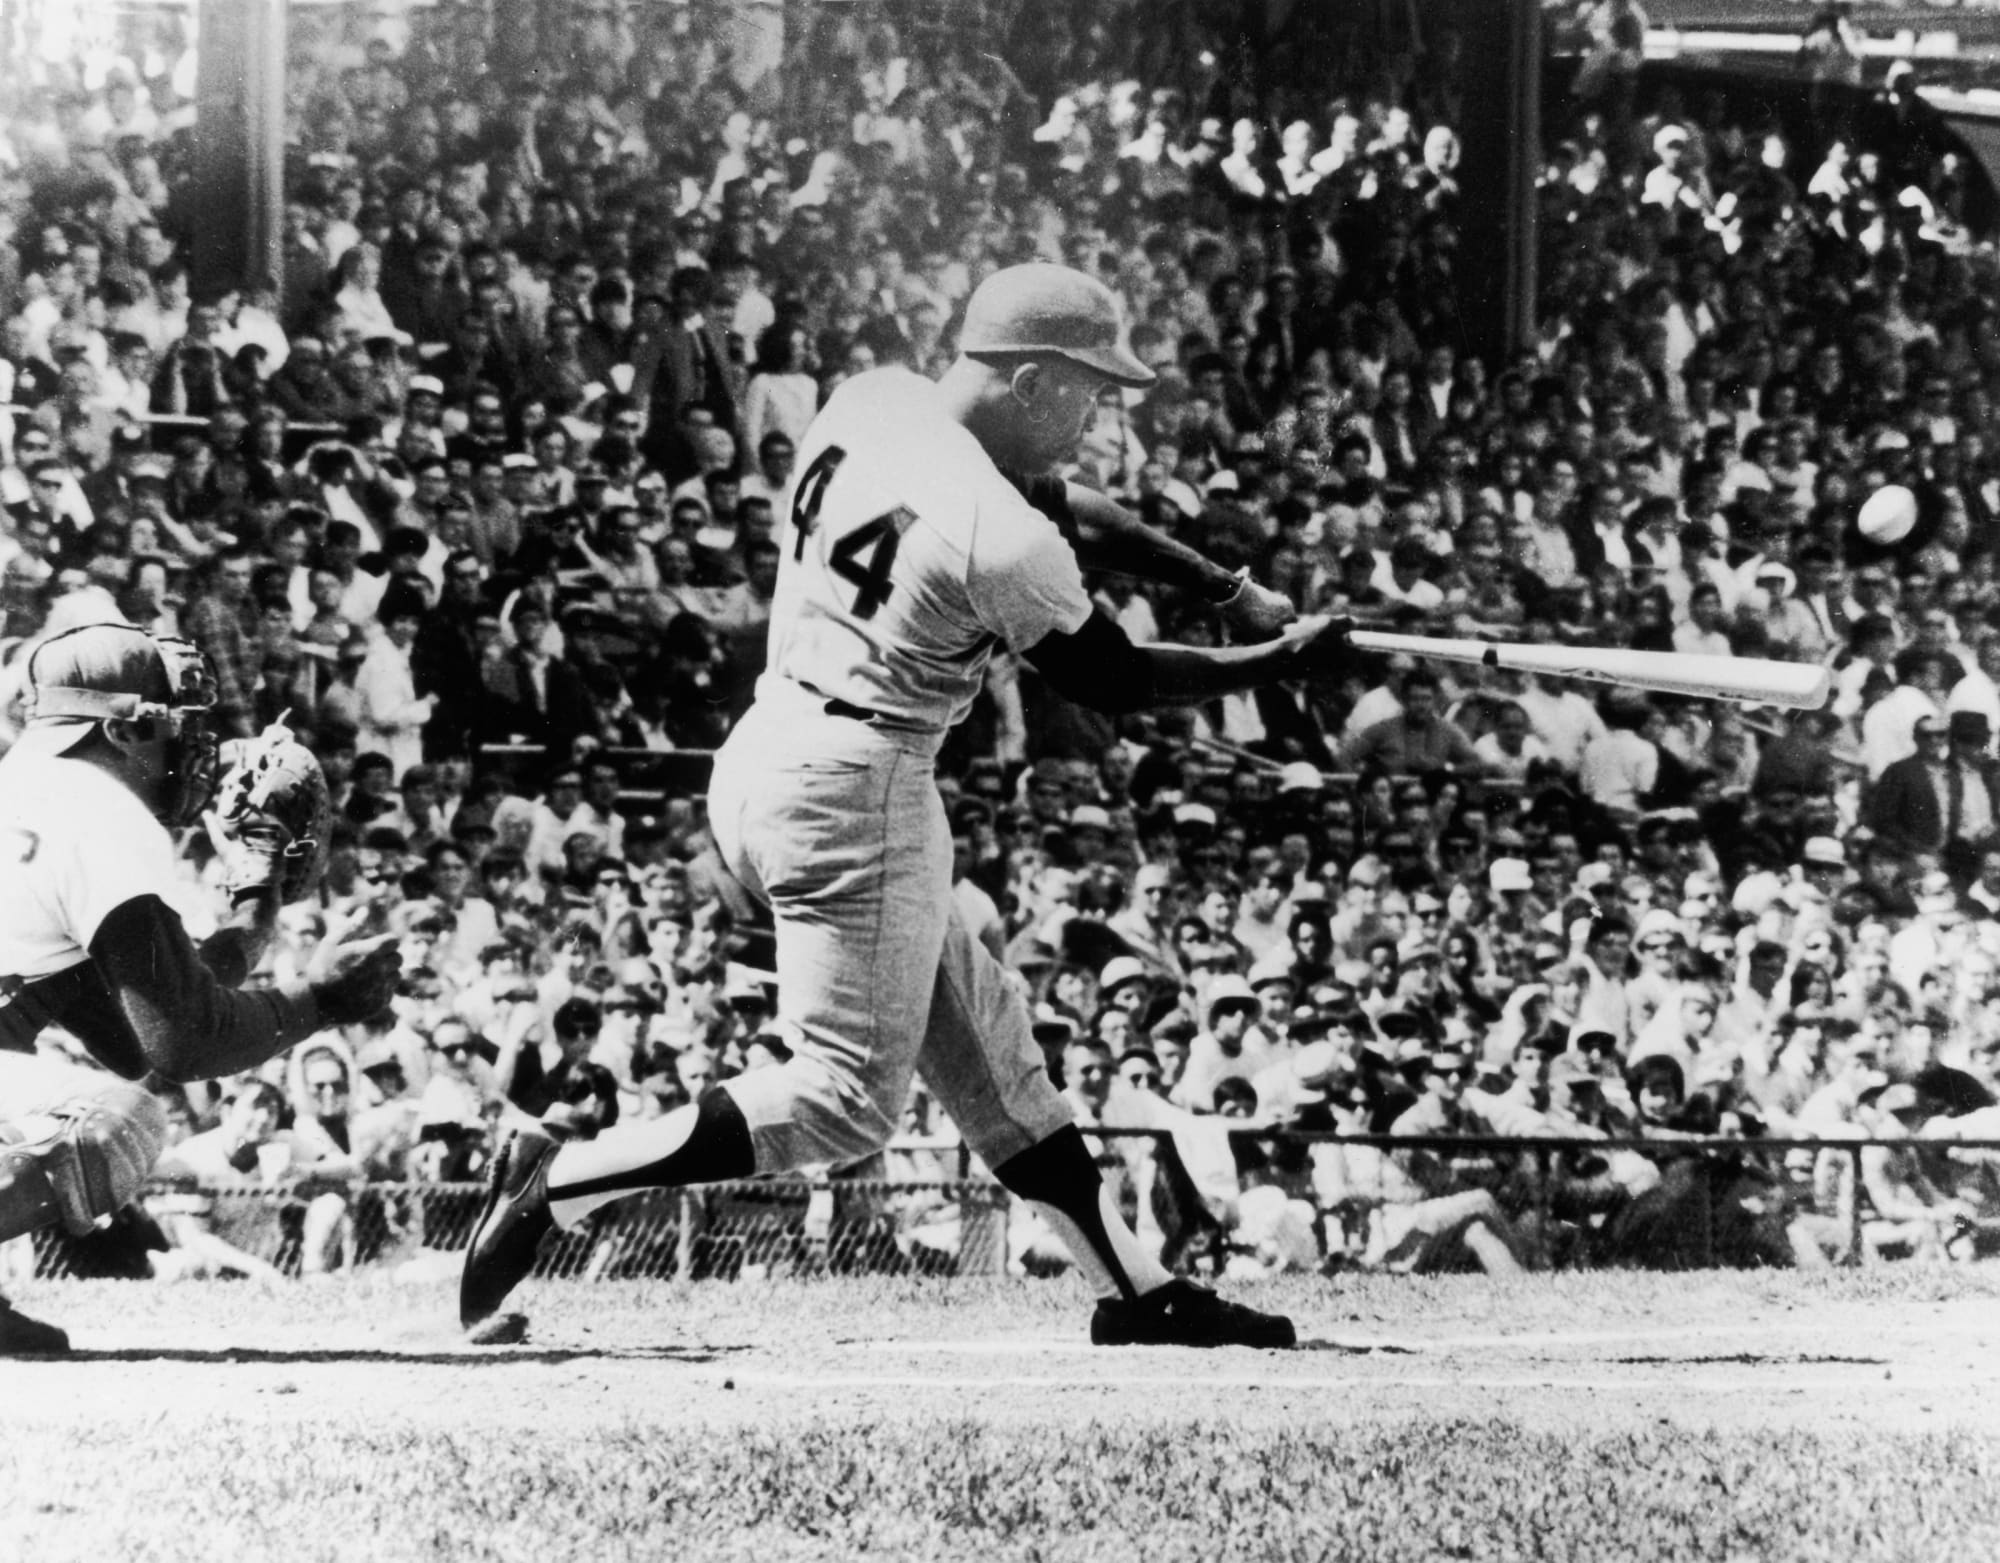 Hank Aaron collects RBI single in his final big league at-bat